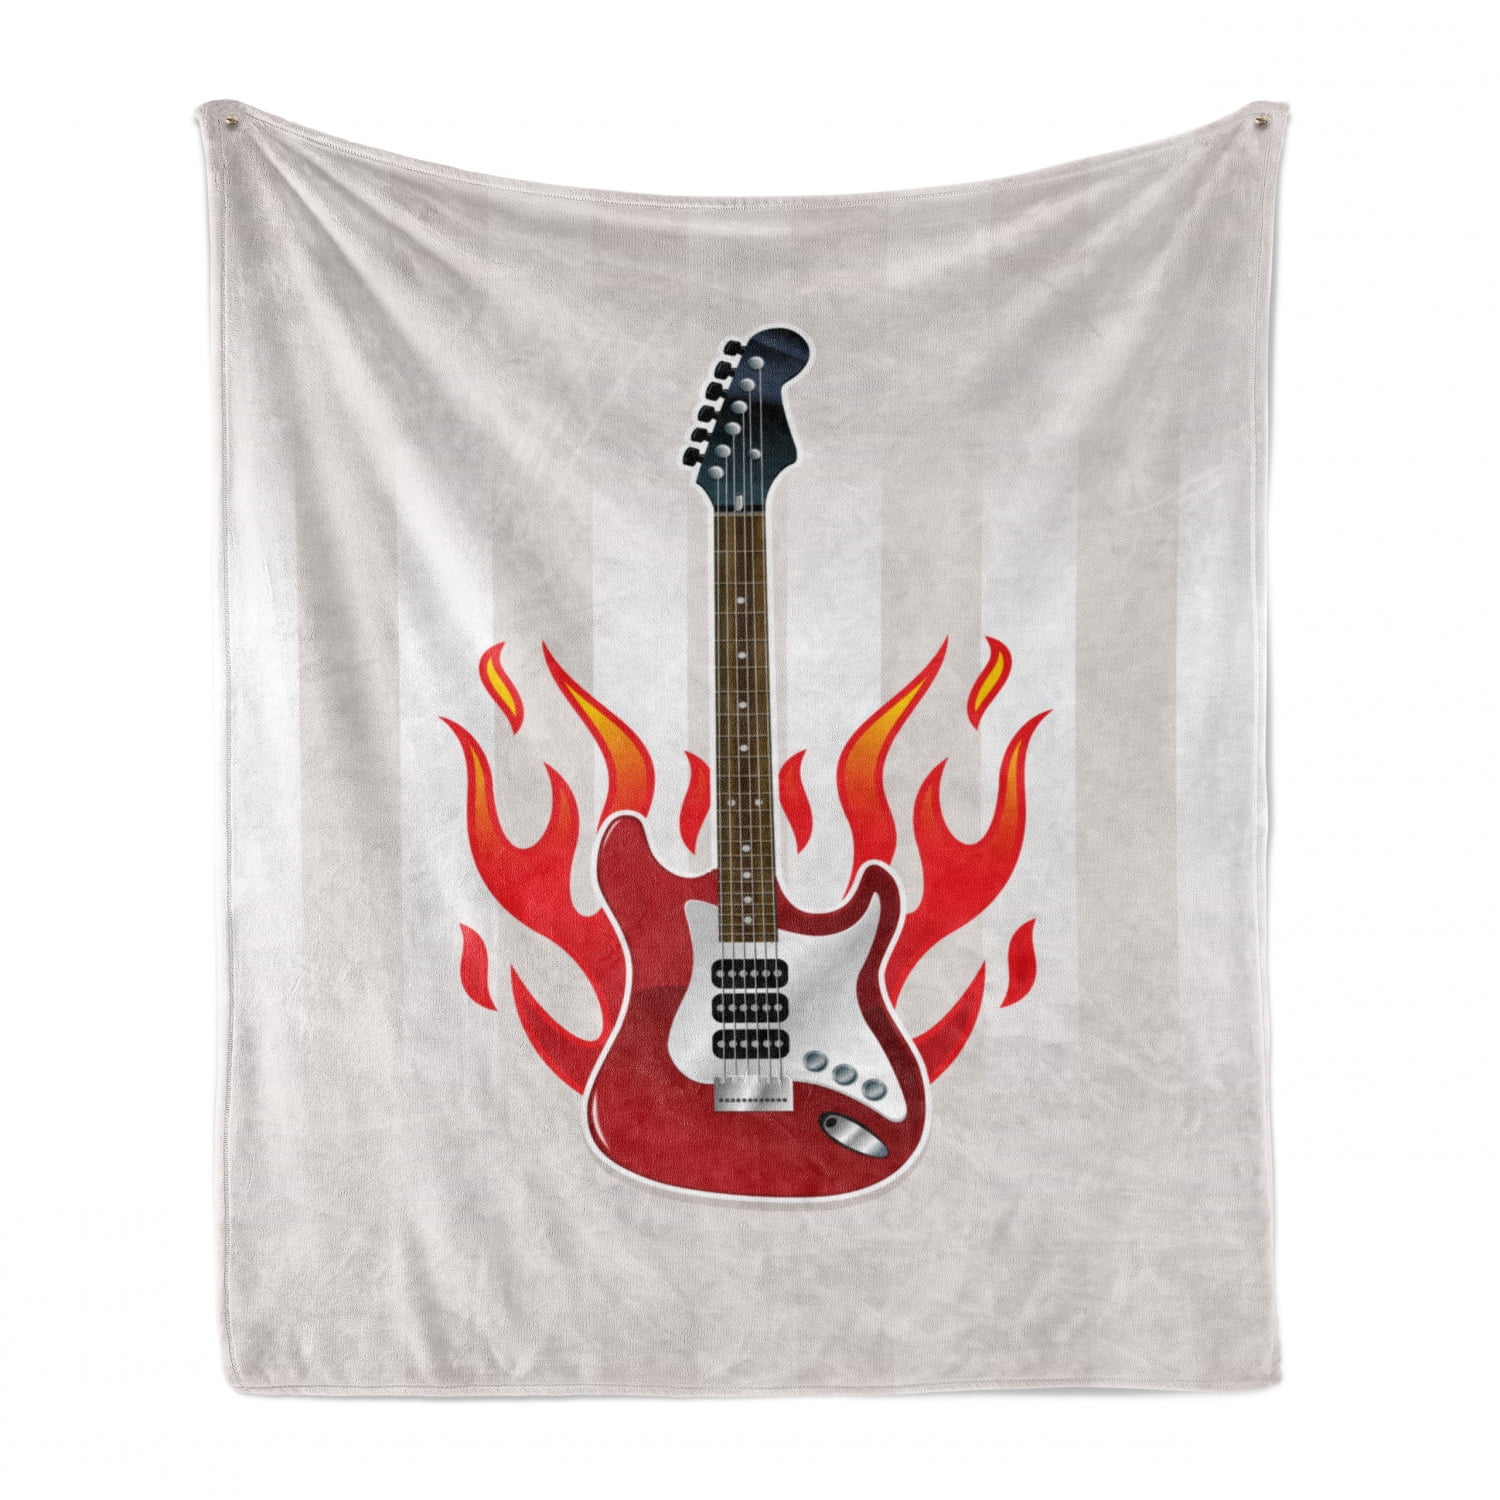 Fire and Water Guitar Throw Blanket Soft Lightweight Warm Flannel Comfort Gift Throws Bedding for Home Bed Sofa Couch Travel 